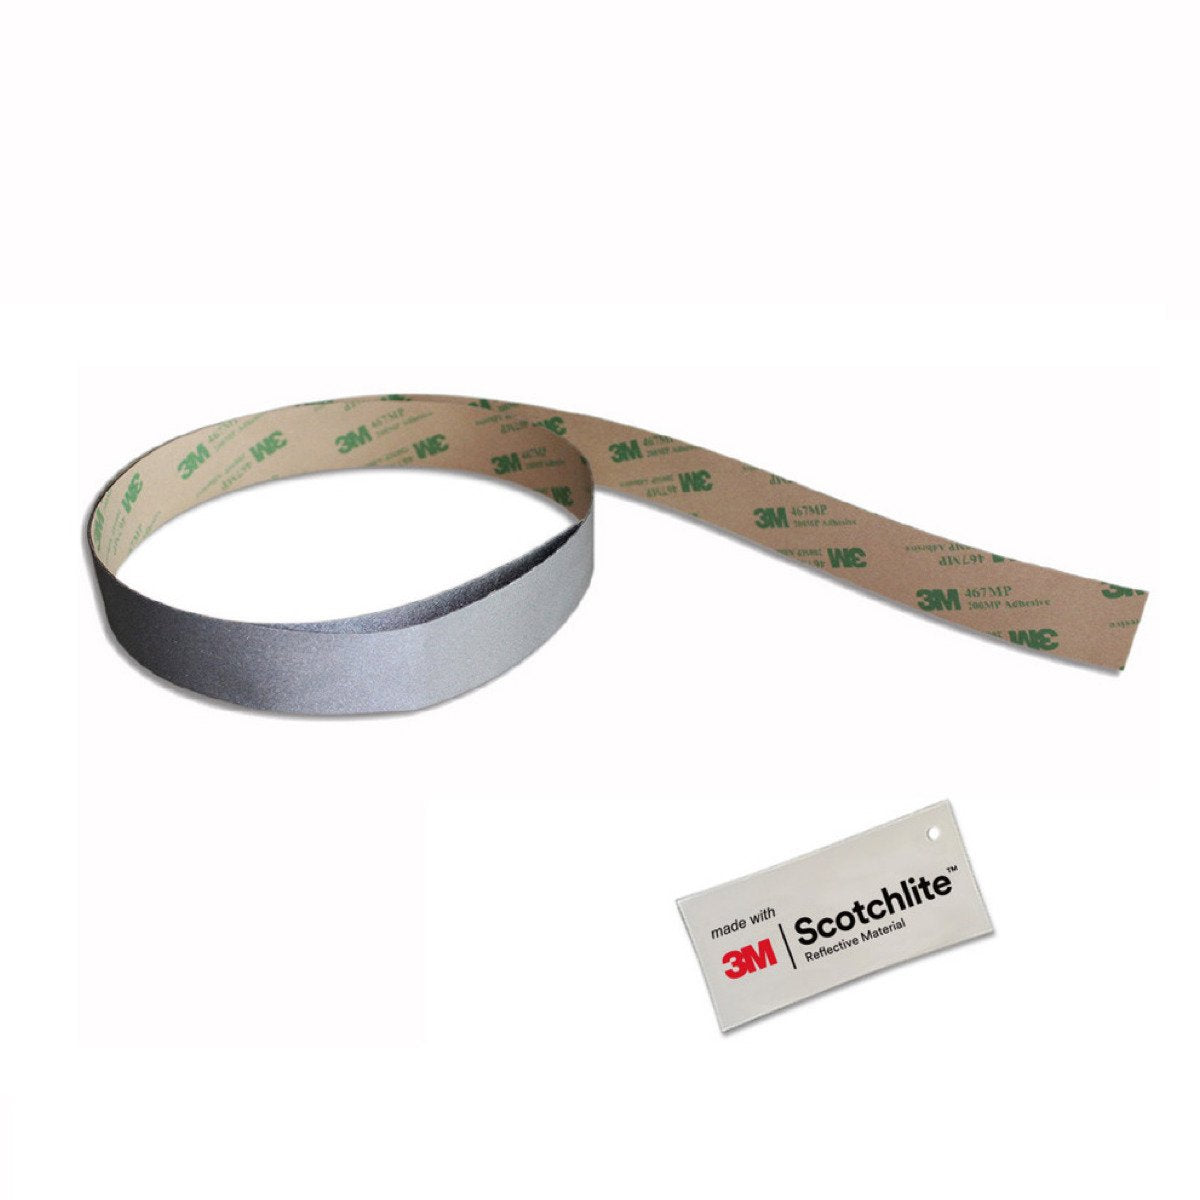 Single roll of reflective tape 